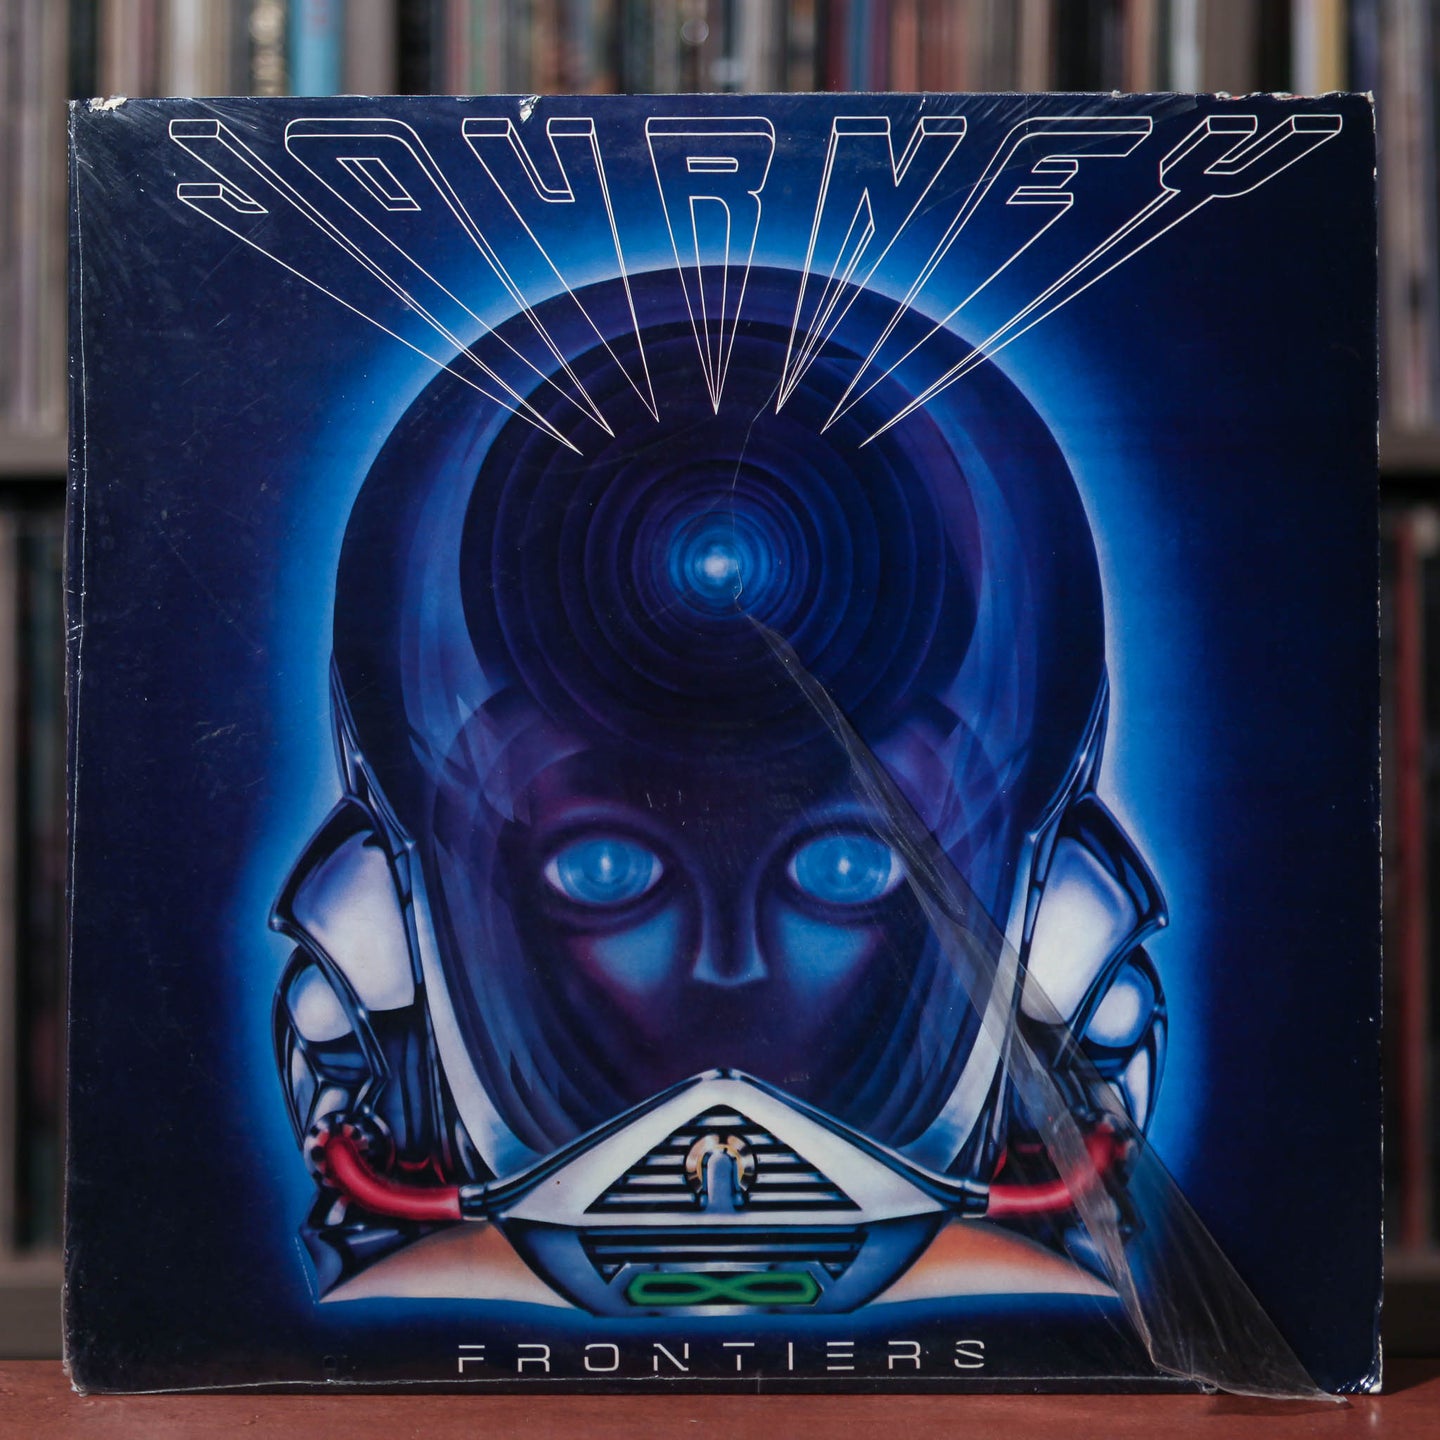 Journey - Frontiers - 1983 Columbia, VG+/VG+ w/Shrink